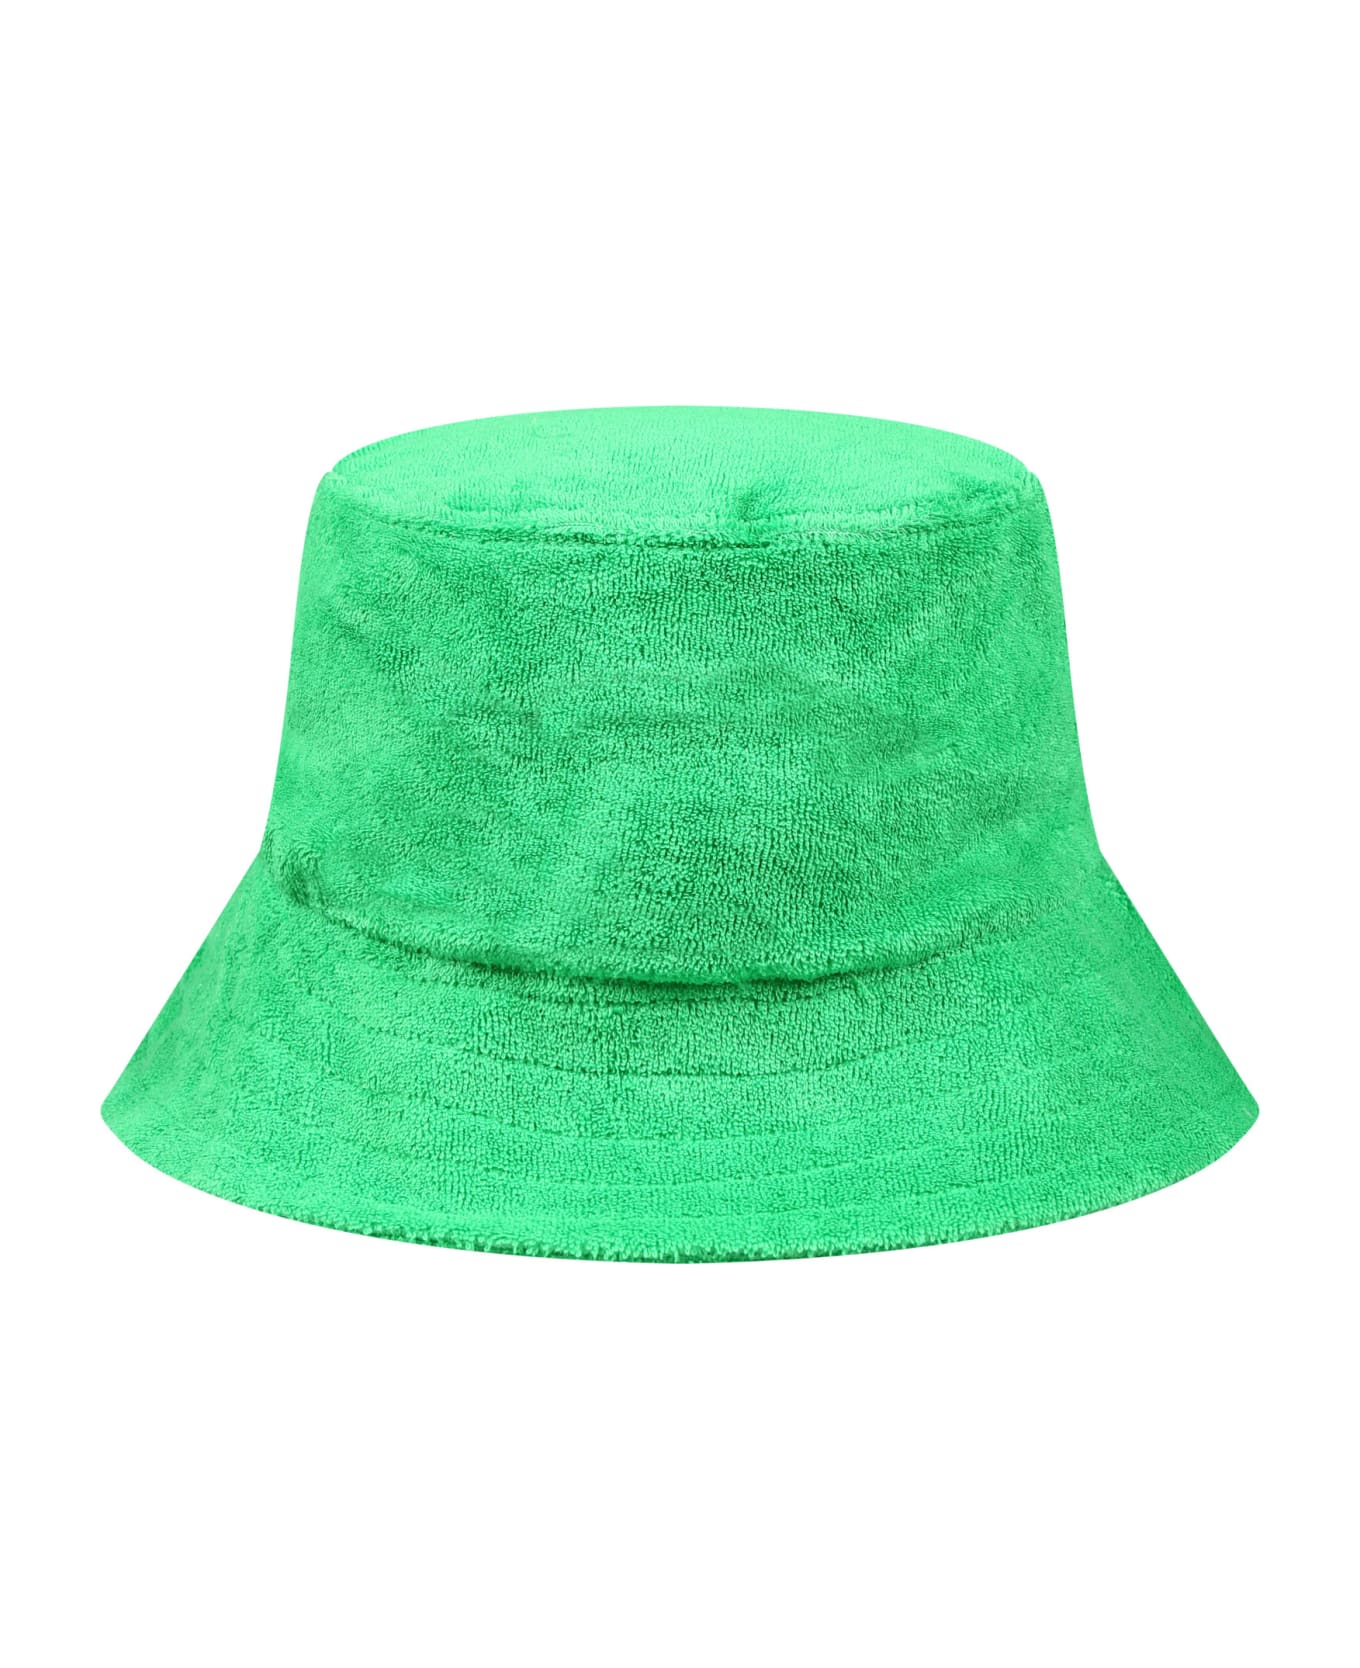 Molo Green Cloche For Kids - Green アクセサリー＆ギフト